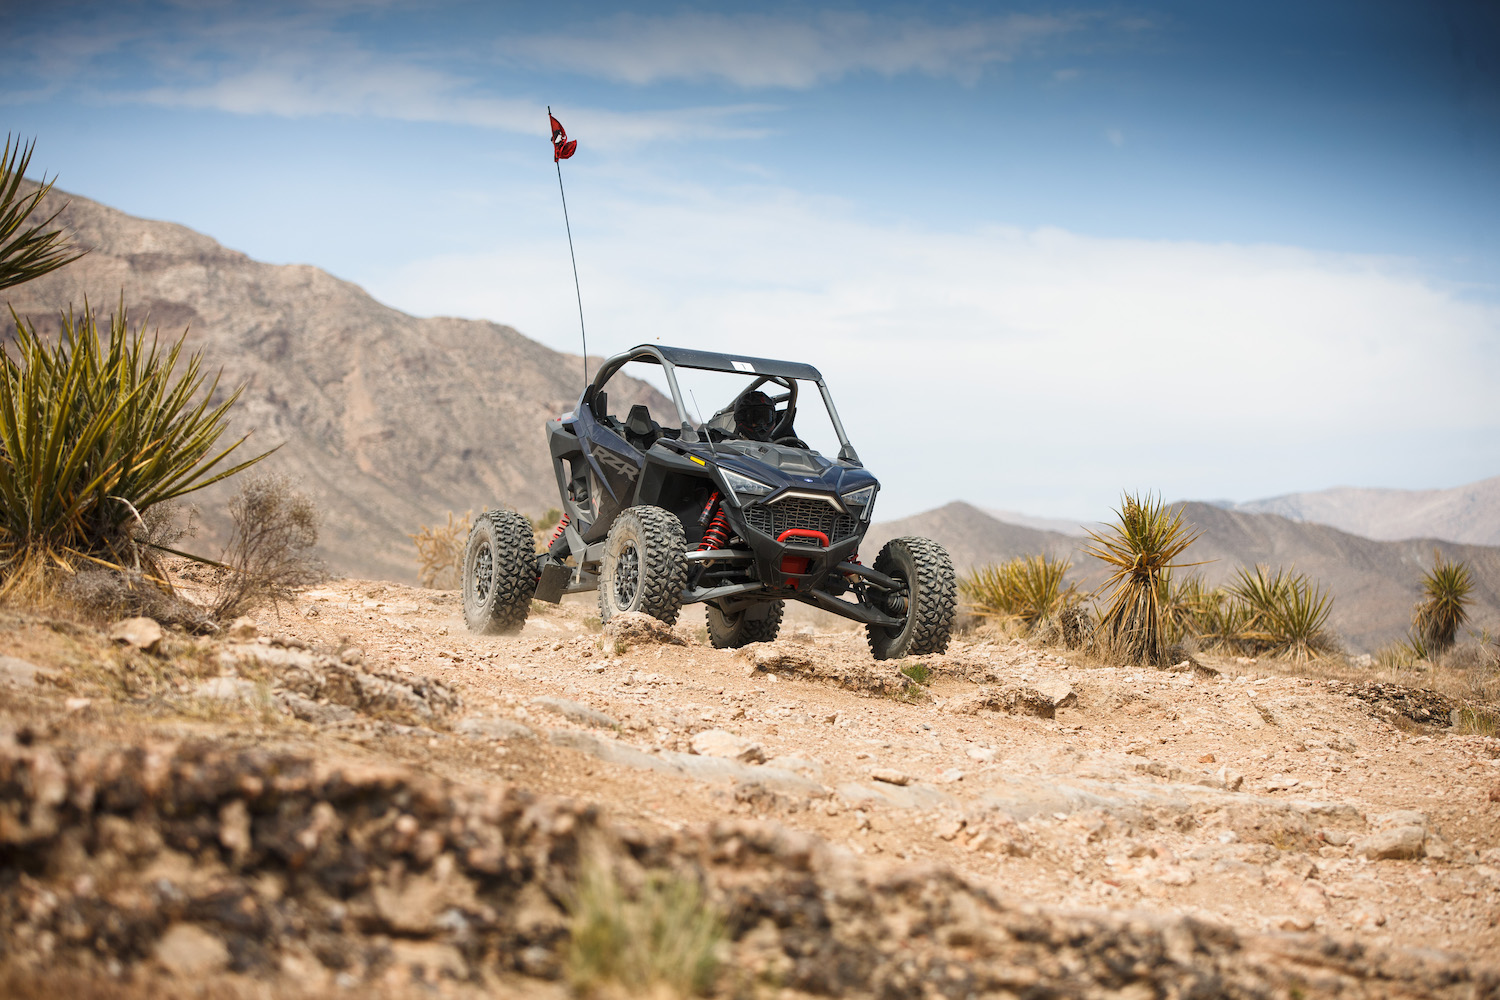 Front end angle of Polaris RZR Pro R in the desert going down a dirt hill with a mountain in the background.